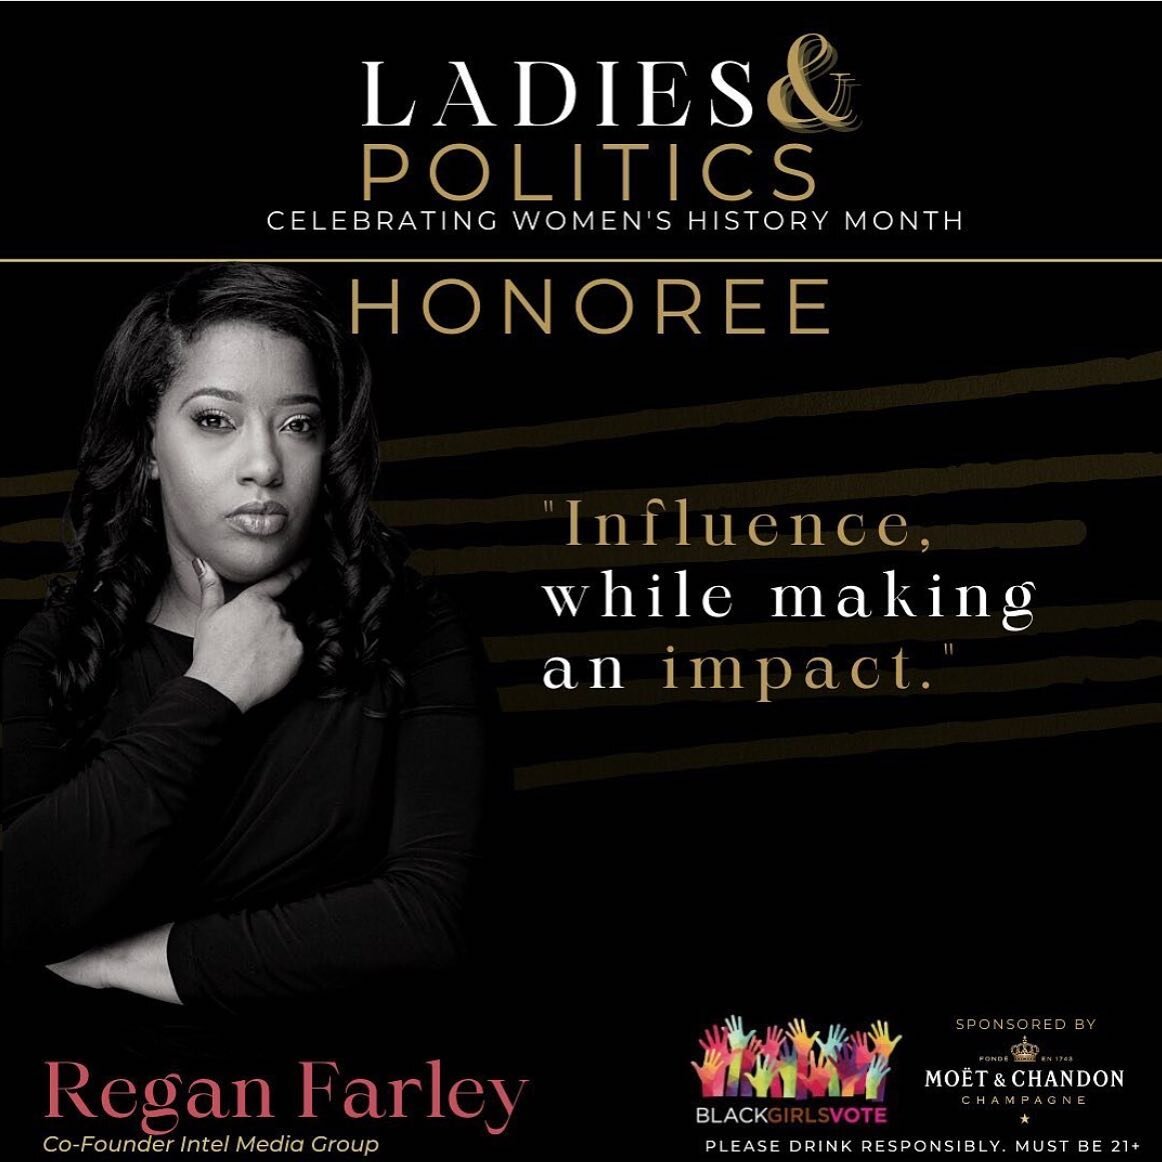 Humbled is an understatement; thank you, @blackgirlsvote  @moetchandon, for showcasing black women who are making a difference&mdash;inspired by all the amazing women who are also on this list. 

#womenshistorymonth 
#BlackGirlsVote
#MoëtChandon
#la